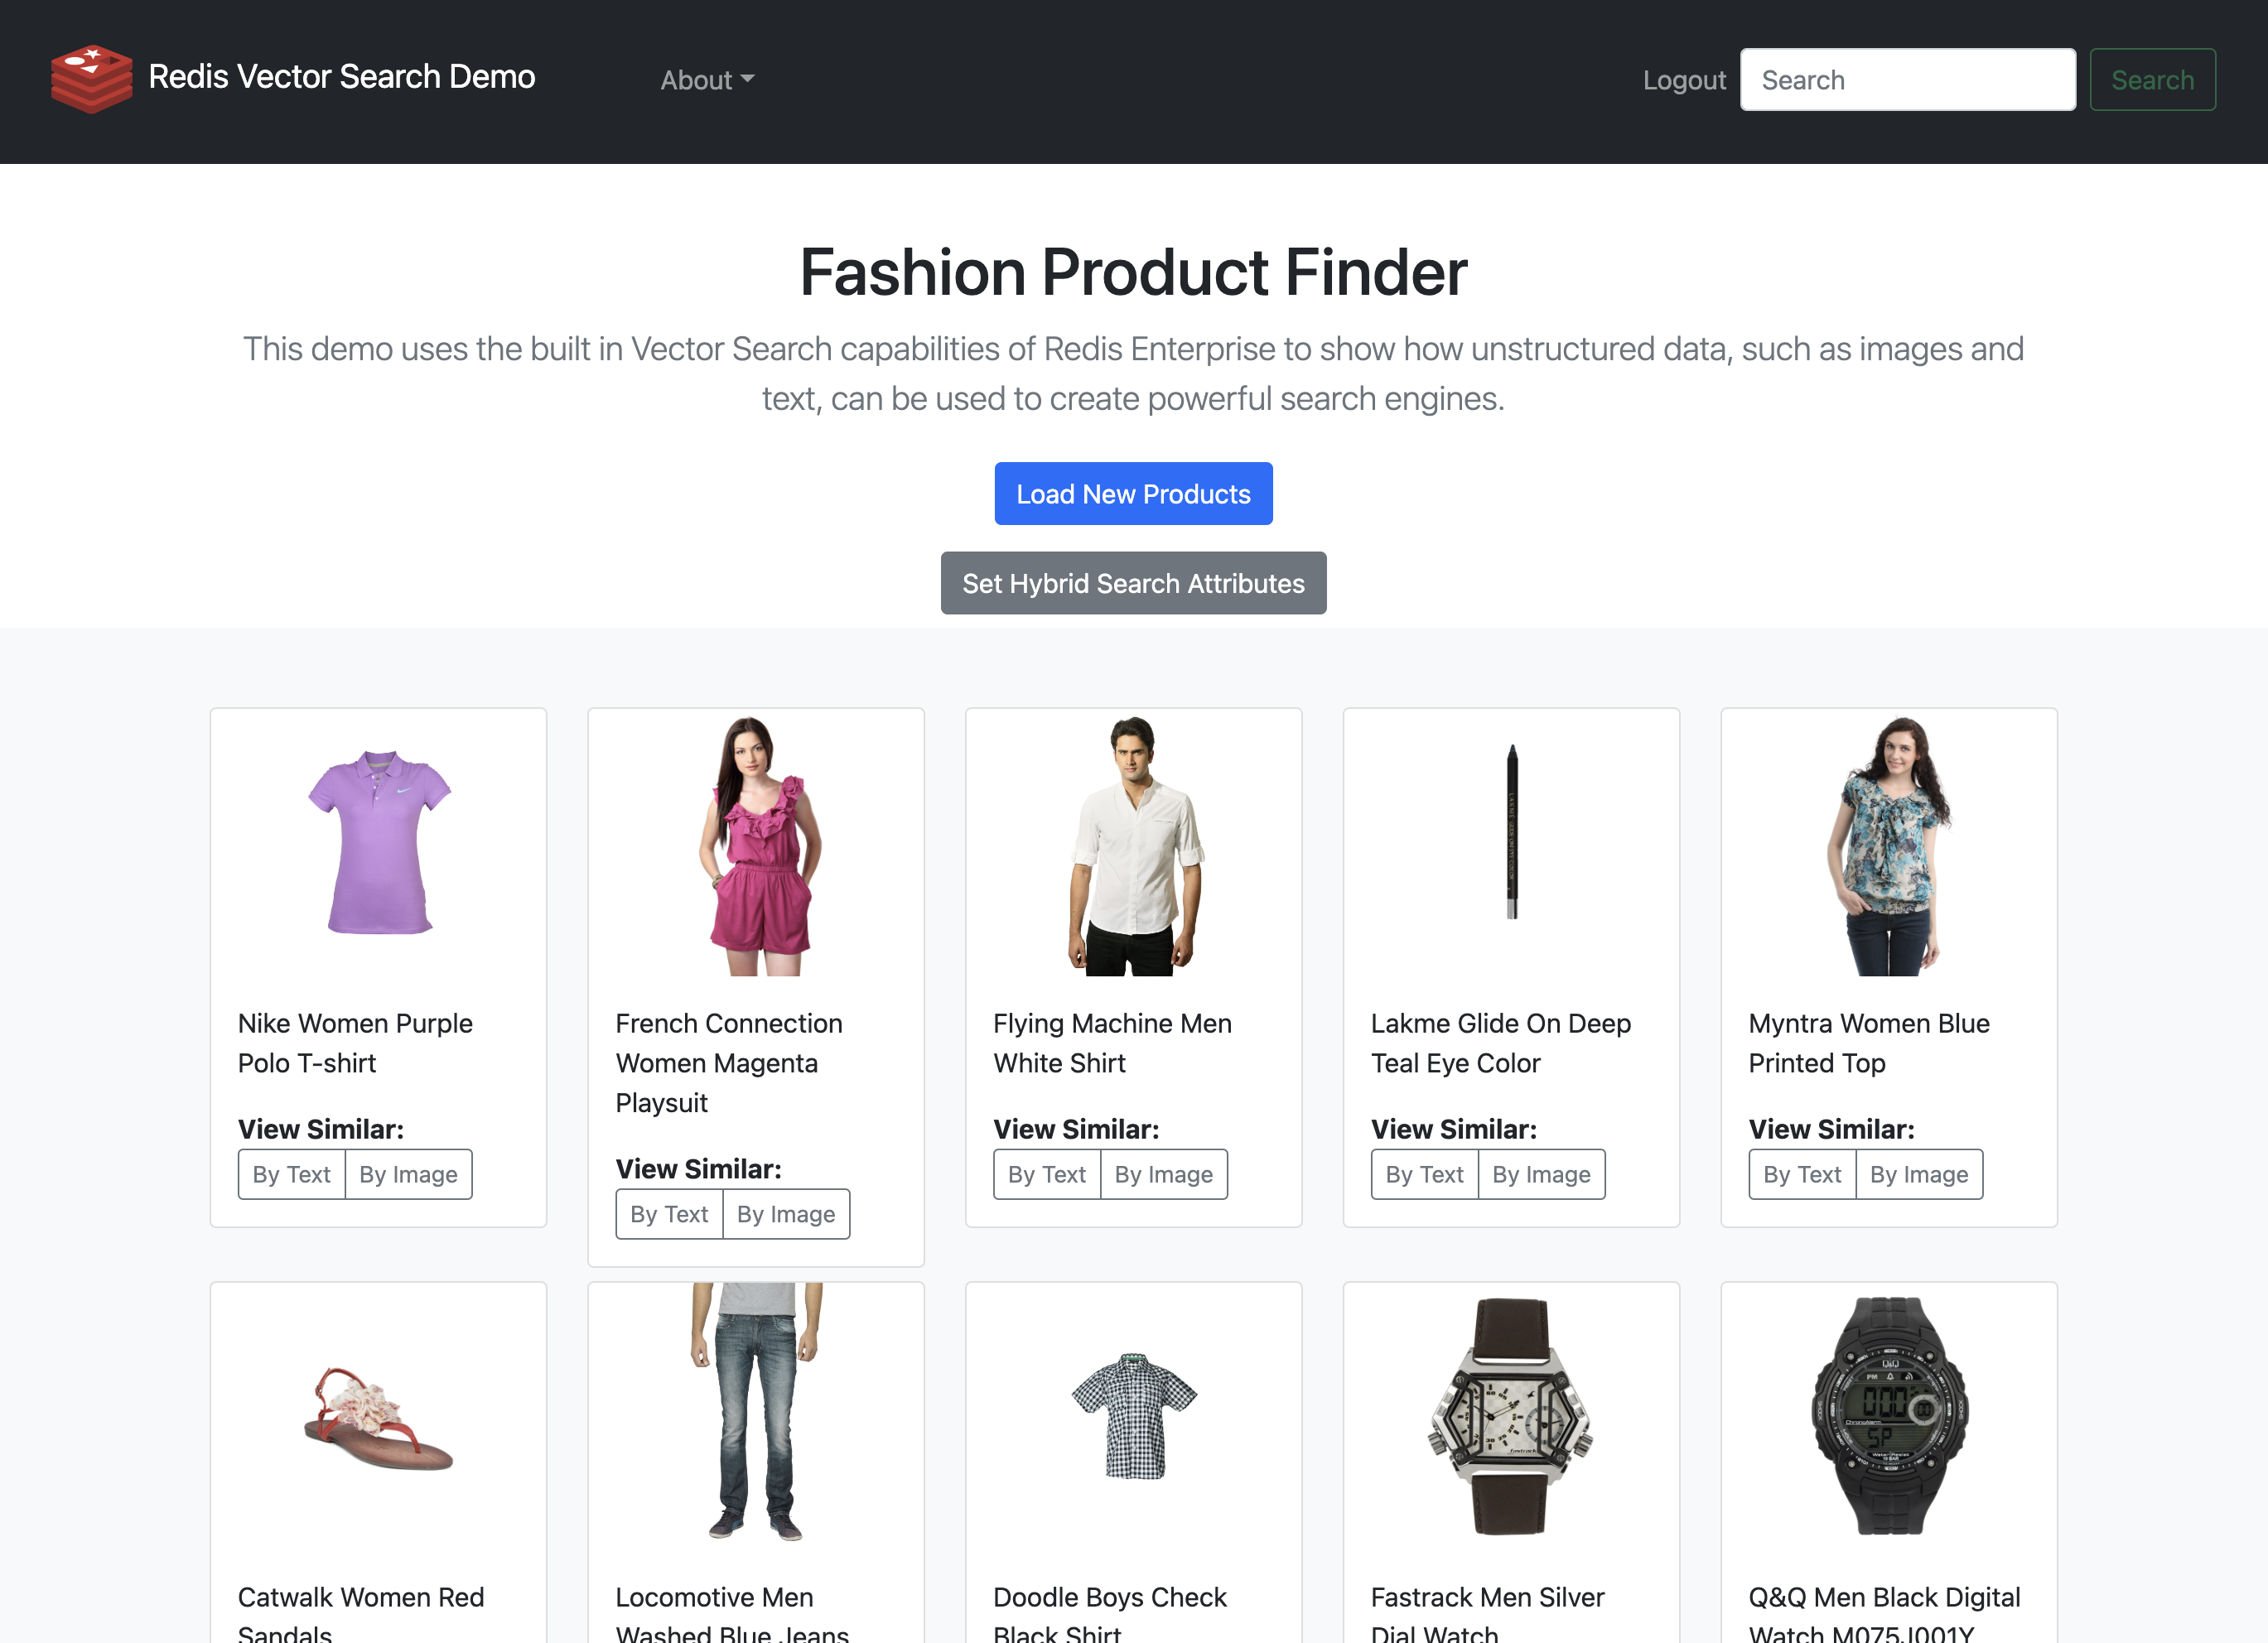 Fashion Product Finder application